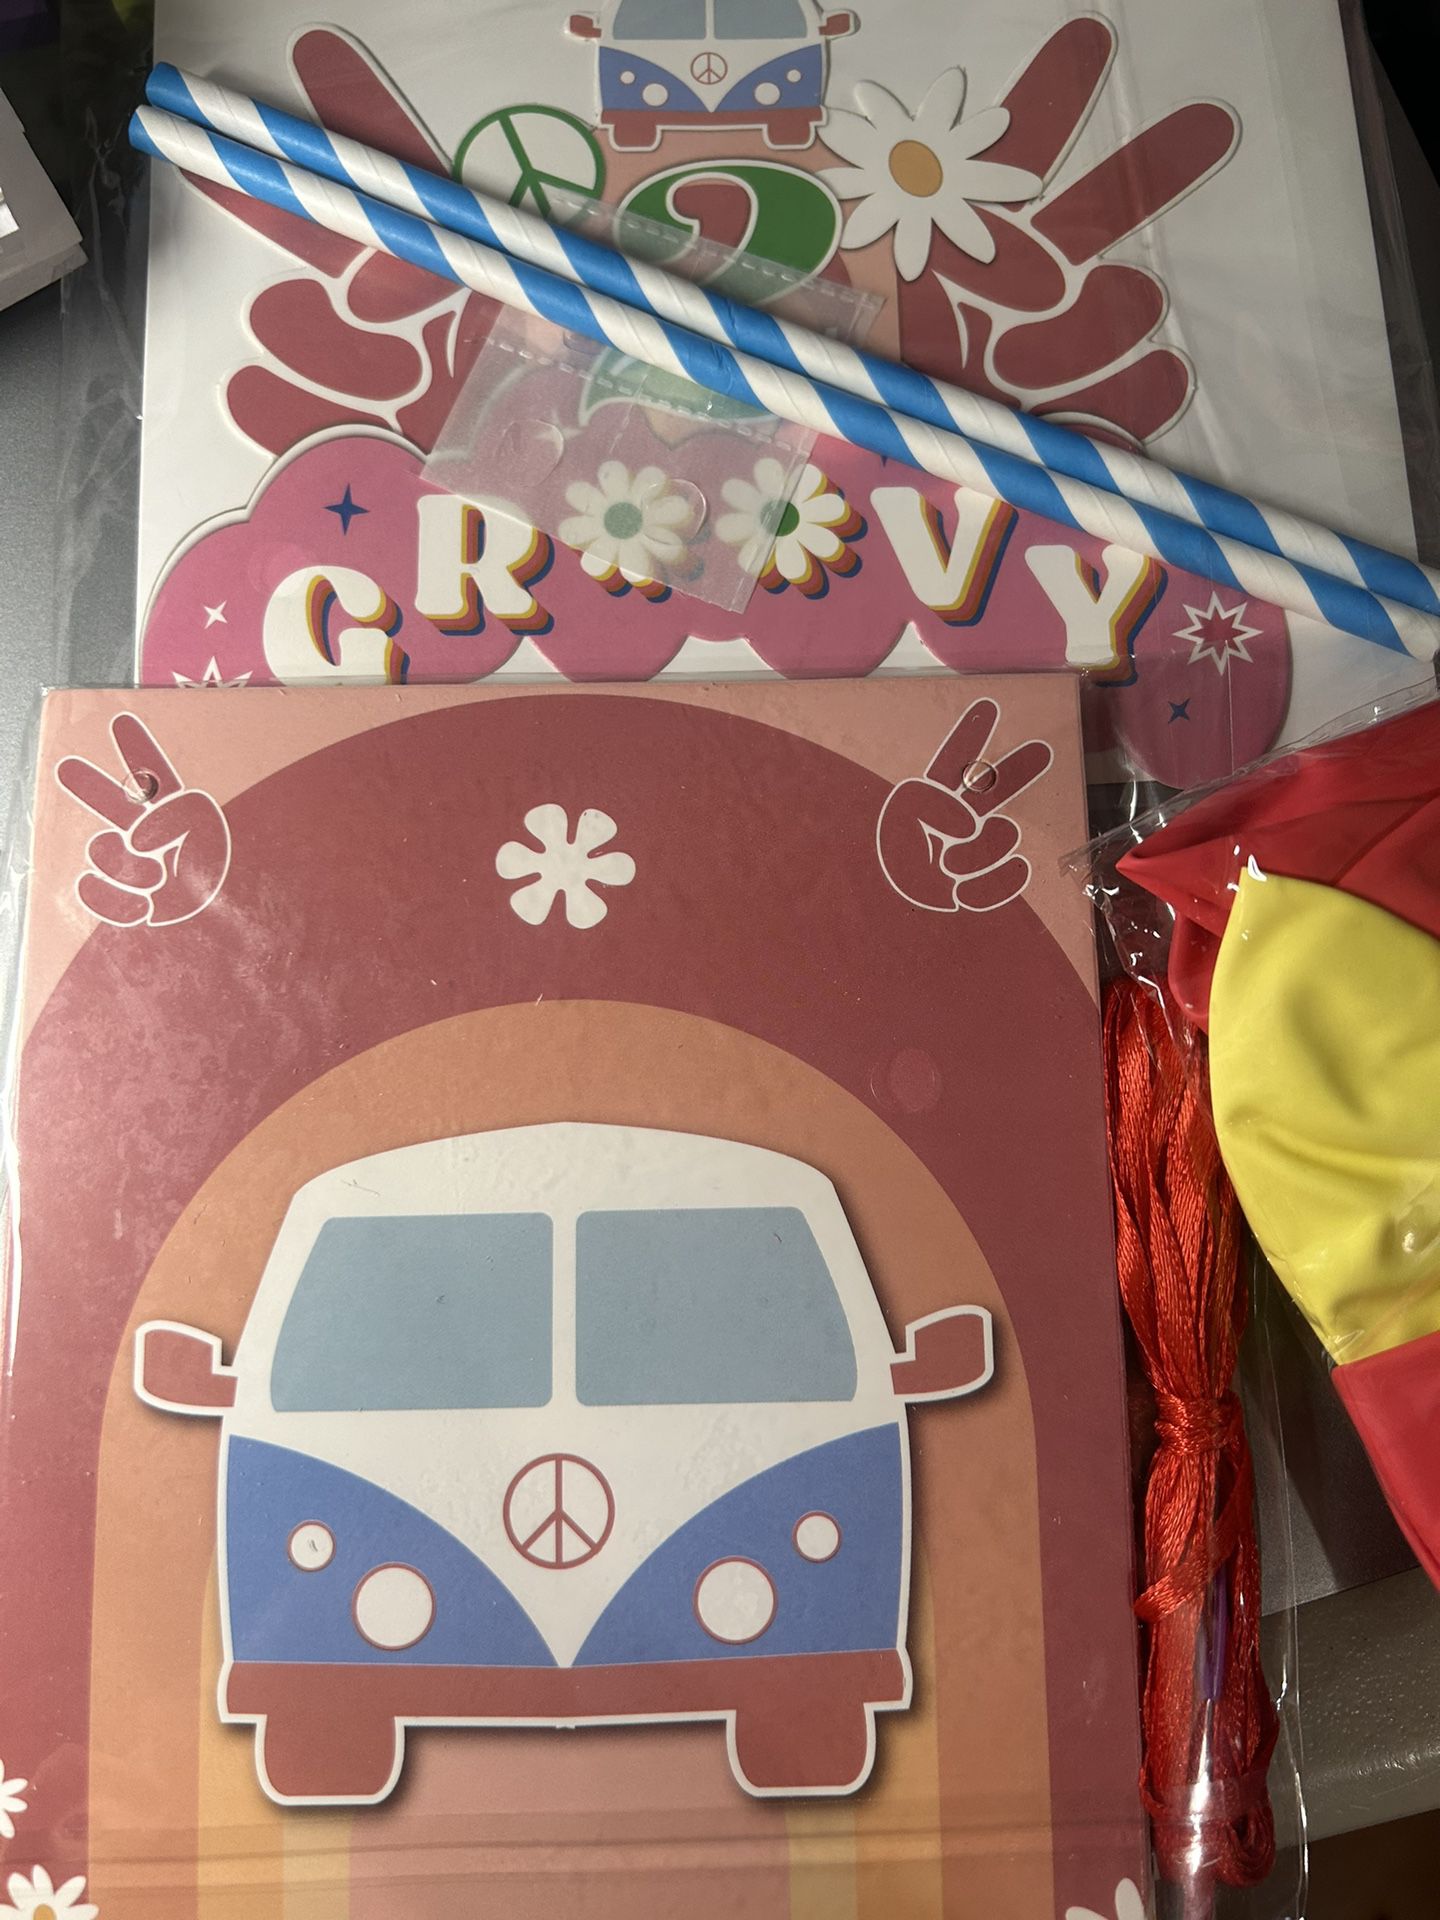 2 Groovy Party Supplies